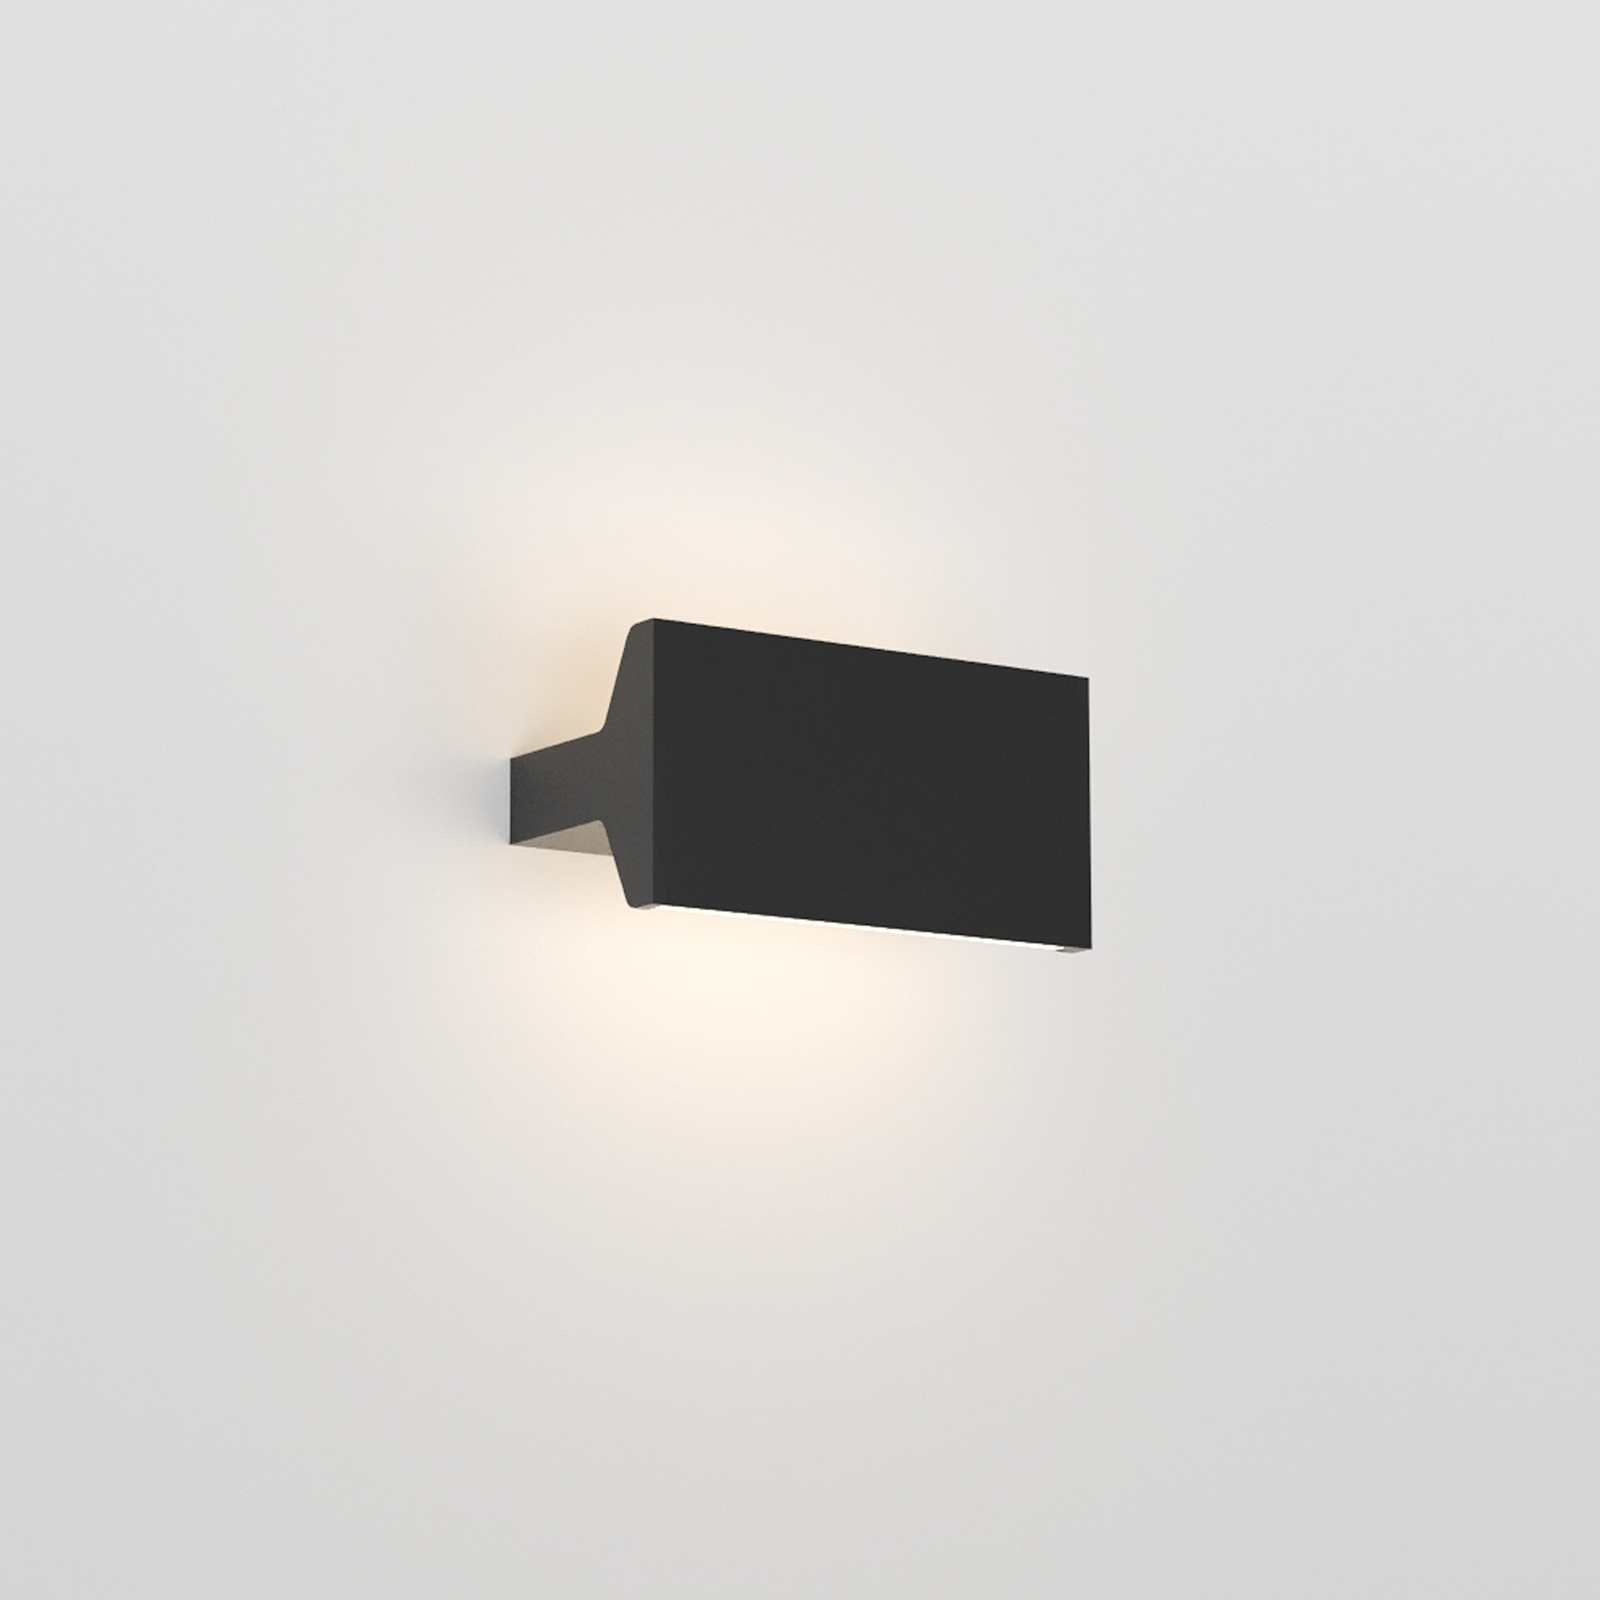 Rotaliana Ipe W1 dimmable phase 3 000 K noire